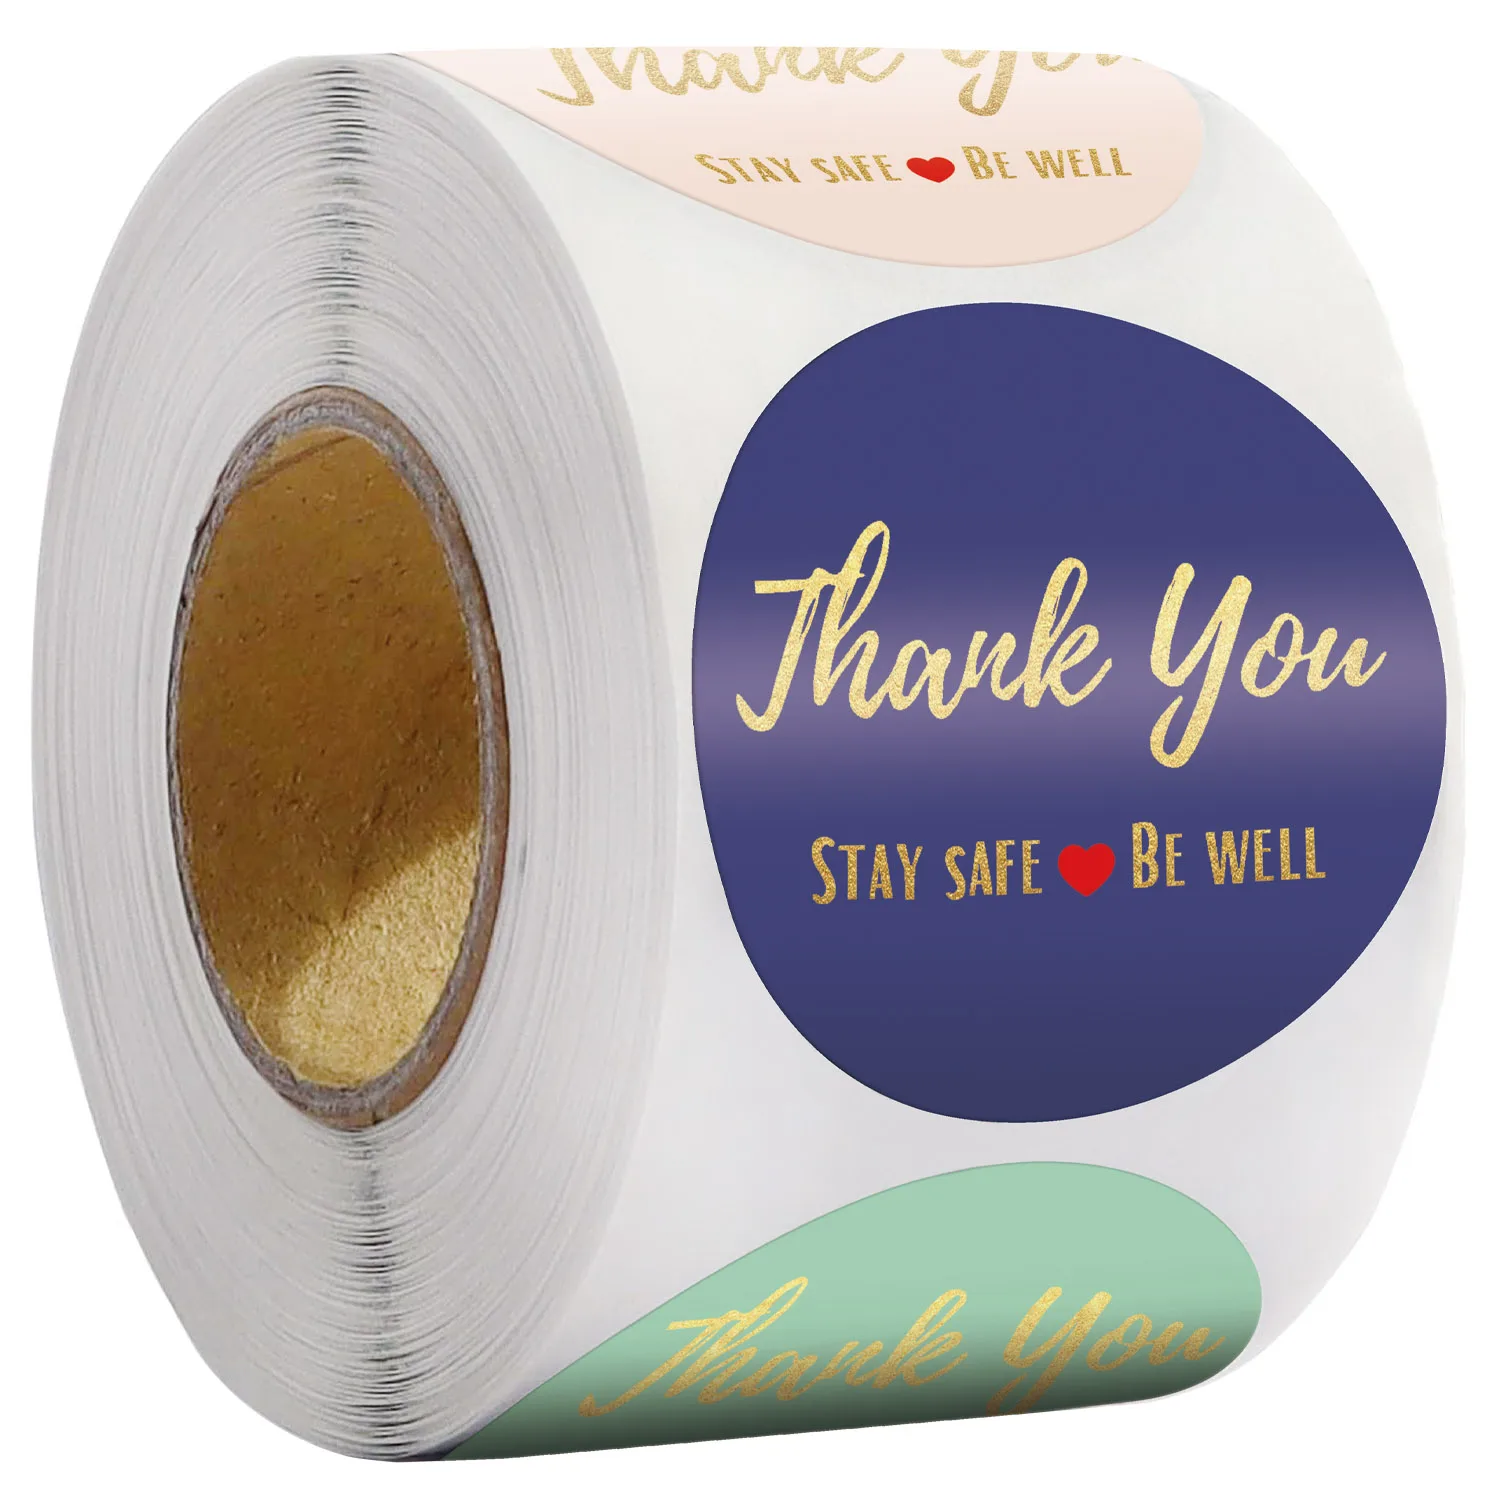 

500pcs/roll Gold Foil Thank You Sticker 1.5 inch Round Seals Labels Stay Safe Be Well With Heart Handmade Sticker for Packing